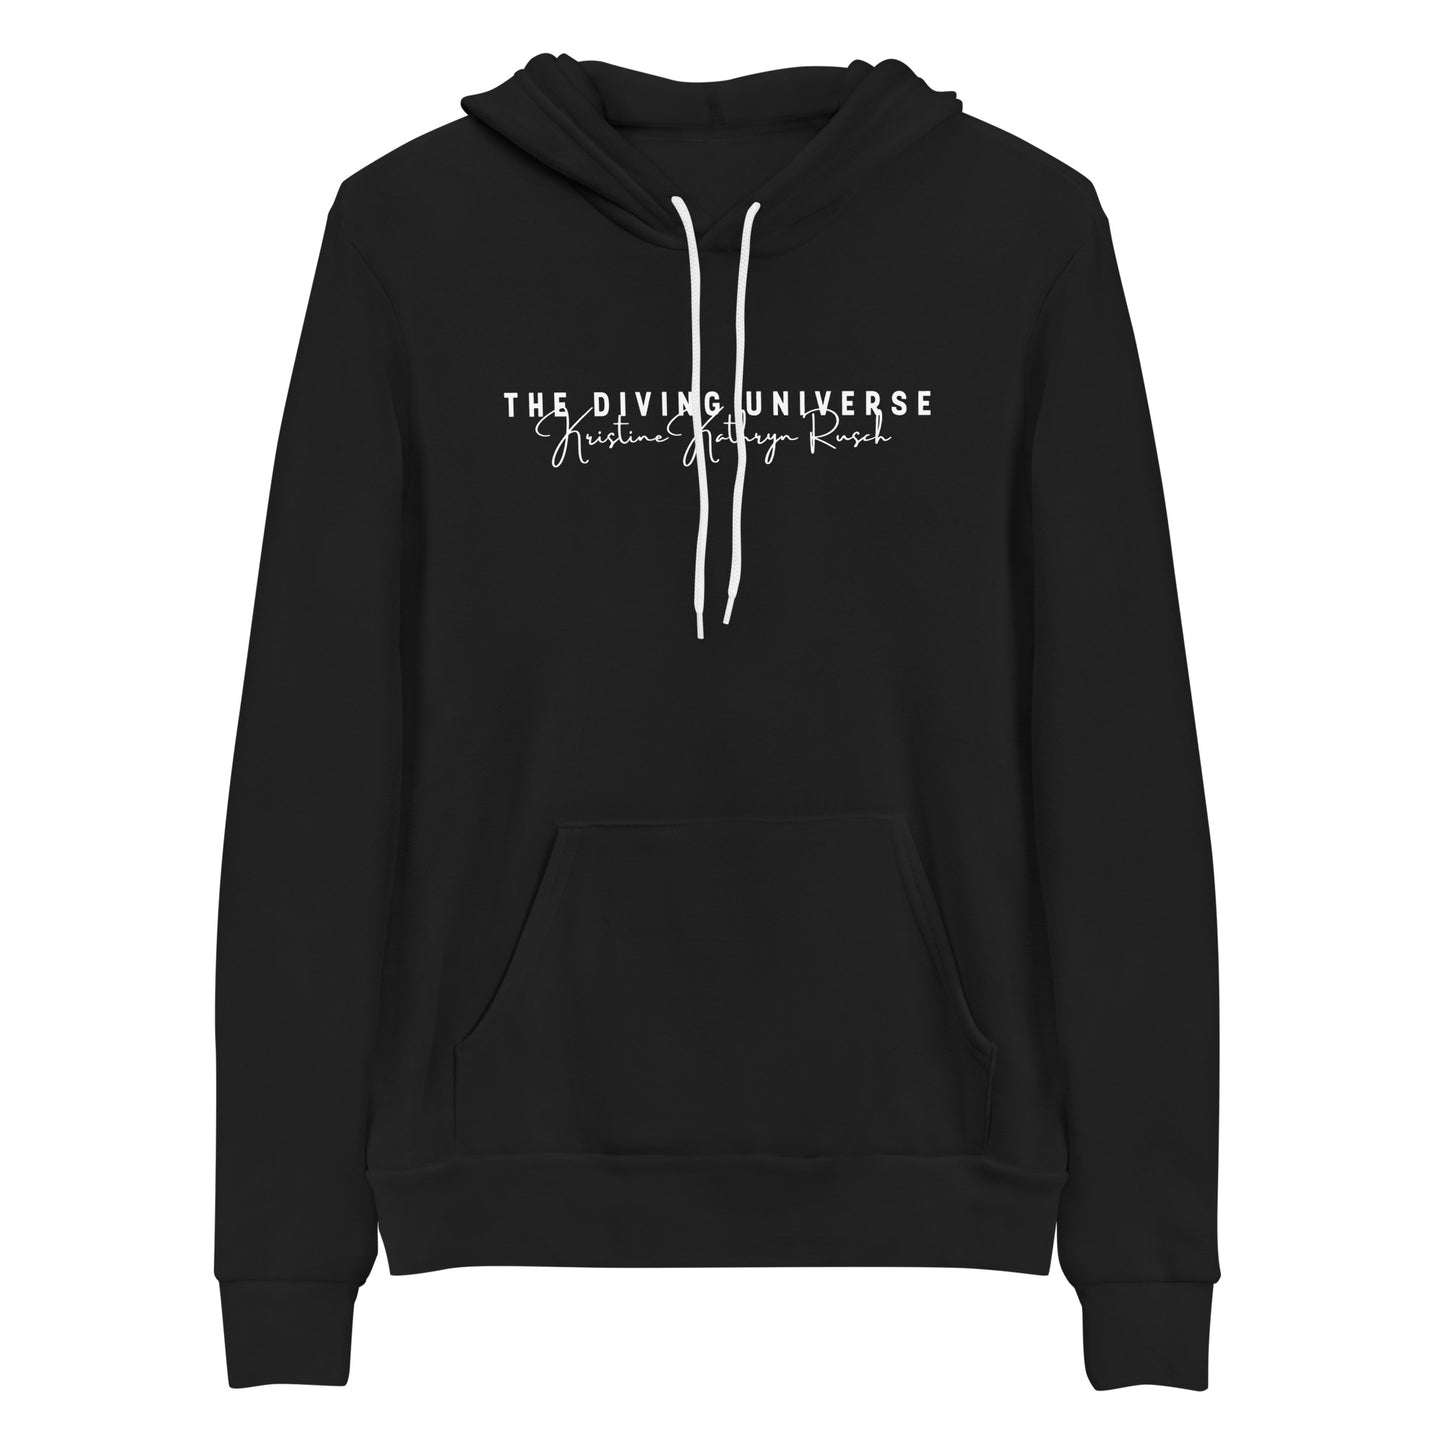 DIVING UNIVERSE LOGO Hoodie - The Diving Universe by Kristine Kathryn Rusch